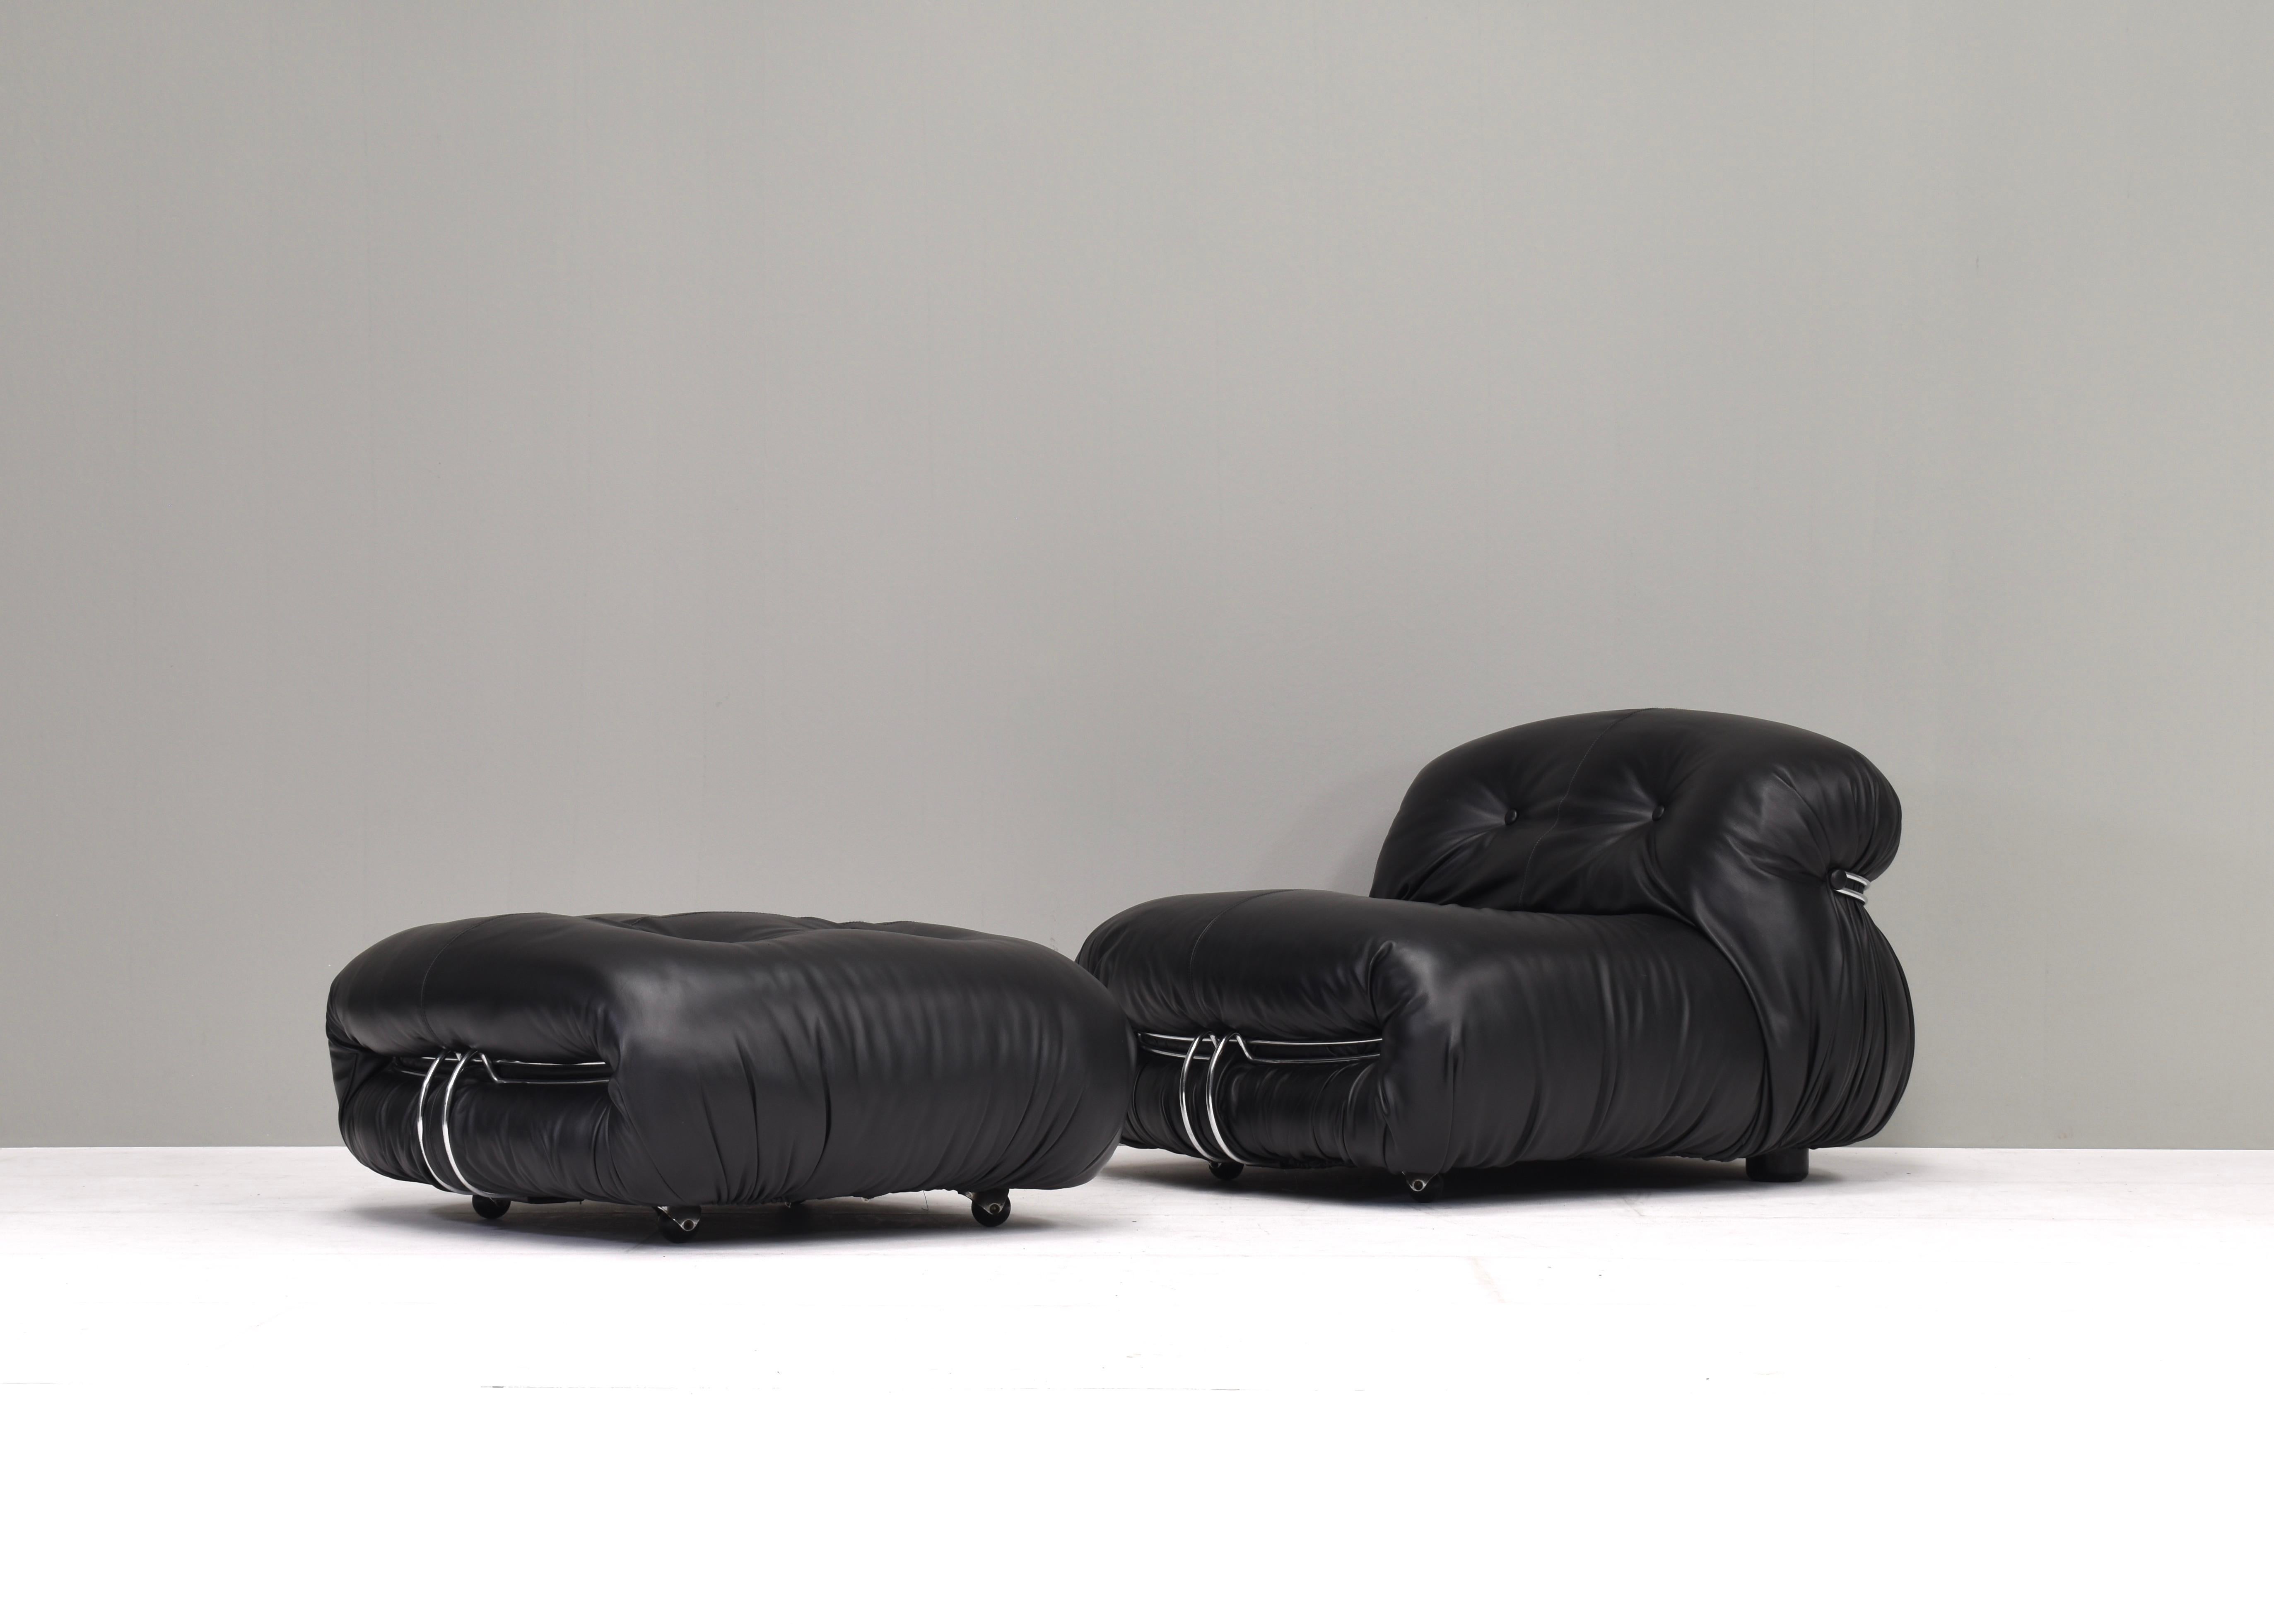 Gorgeous Soriana chair and pouf by Afra & Tobia Scarpa for Cassina, Italy, circa 1970. The set has been reupholstered in very high-end soft Italian calf skin leather.
Please note: the listed set price is for one pair (1 chair + 1 pouf). We have two